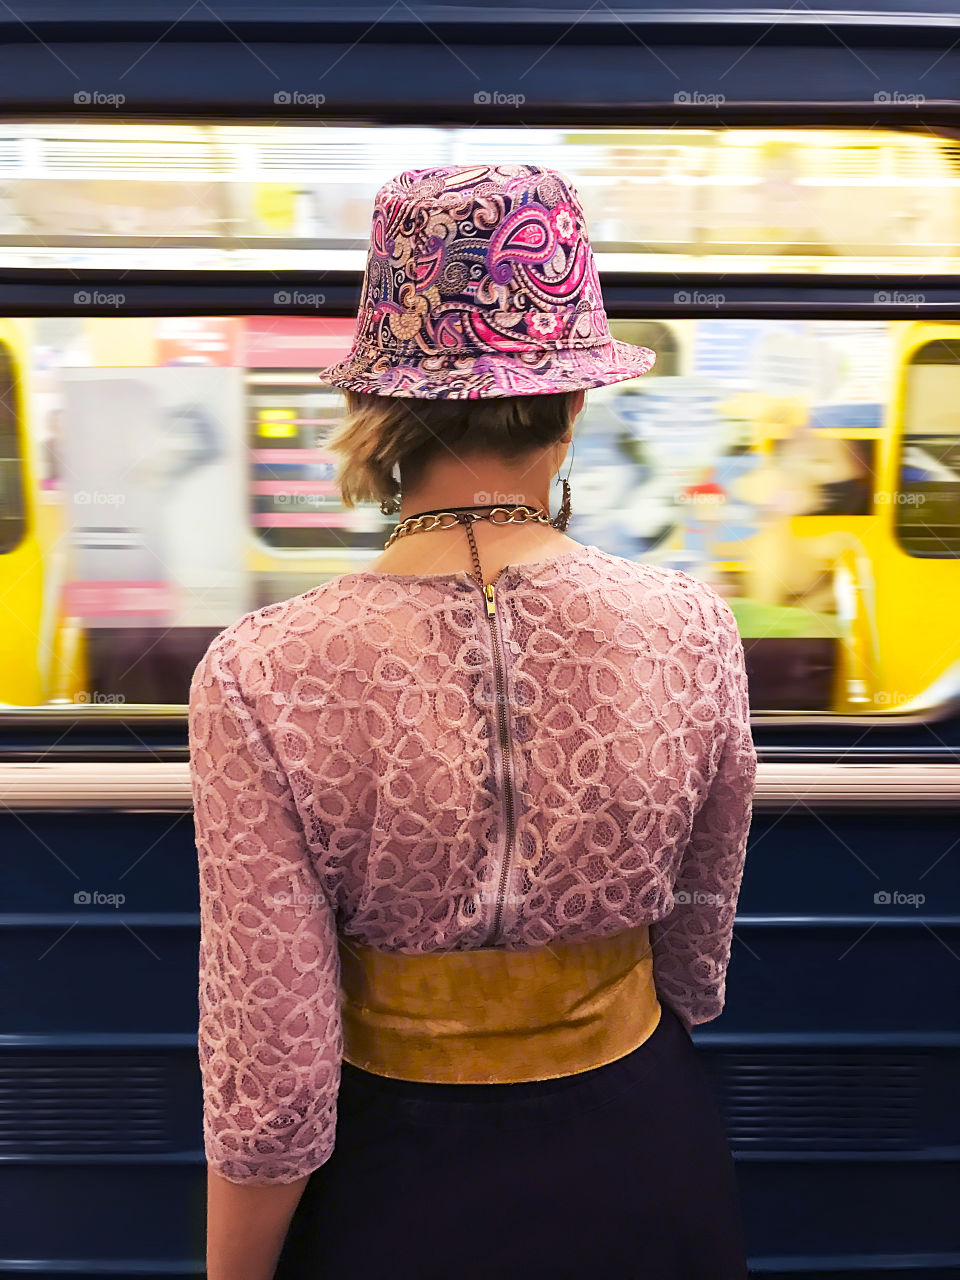 Fashionable woman wearing stylish colorful clothes and accessories waiting for a moving train to stop 